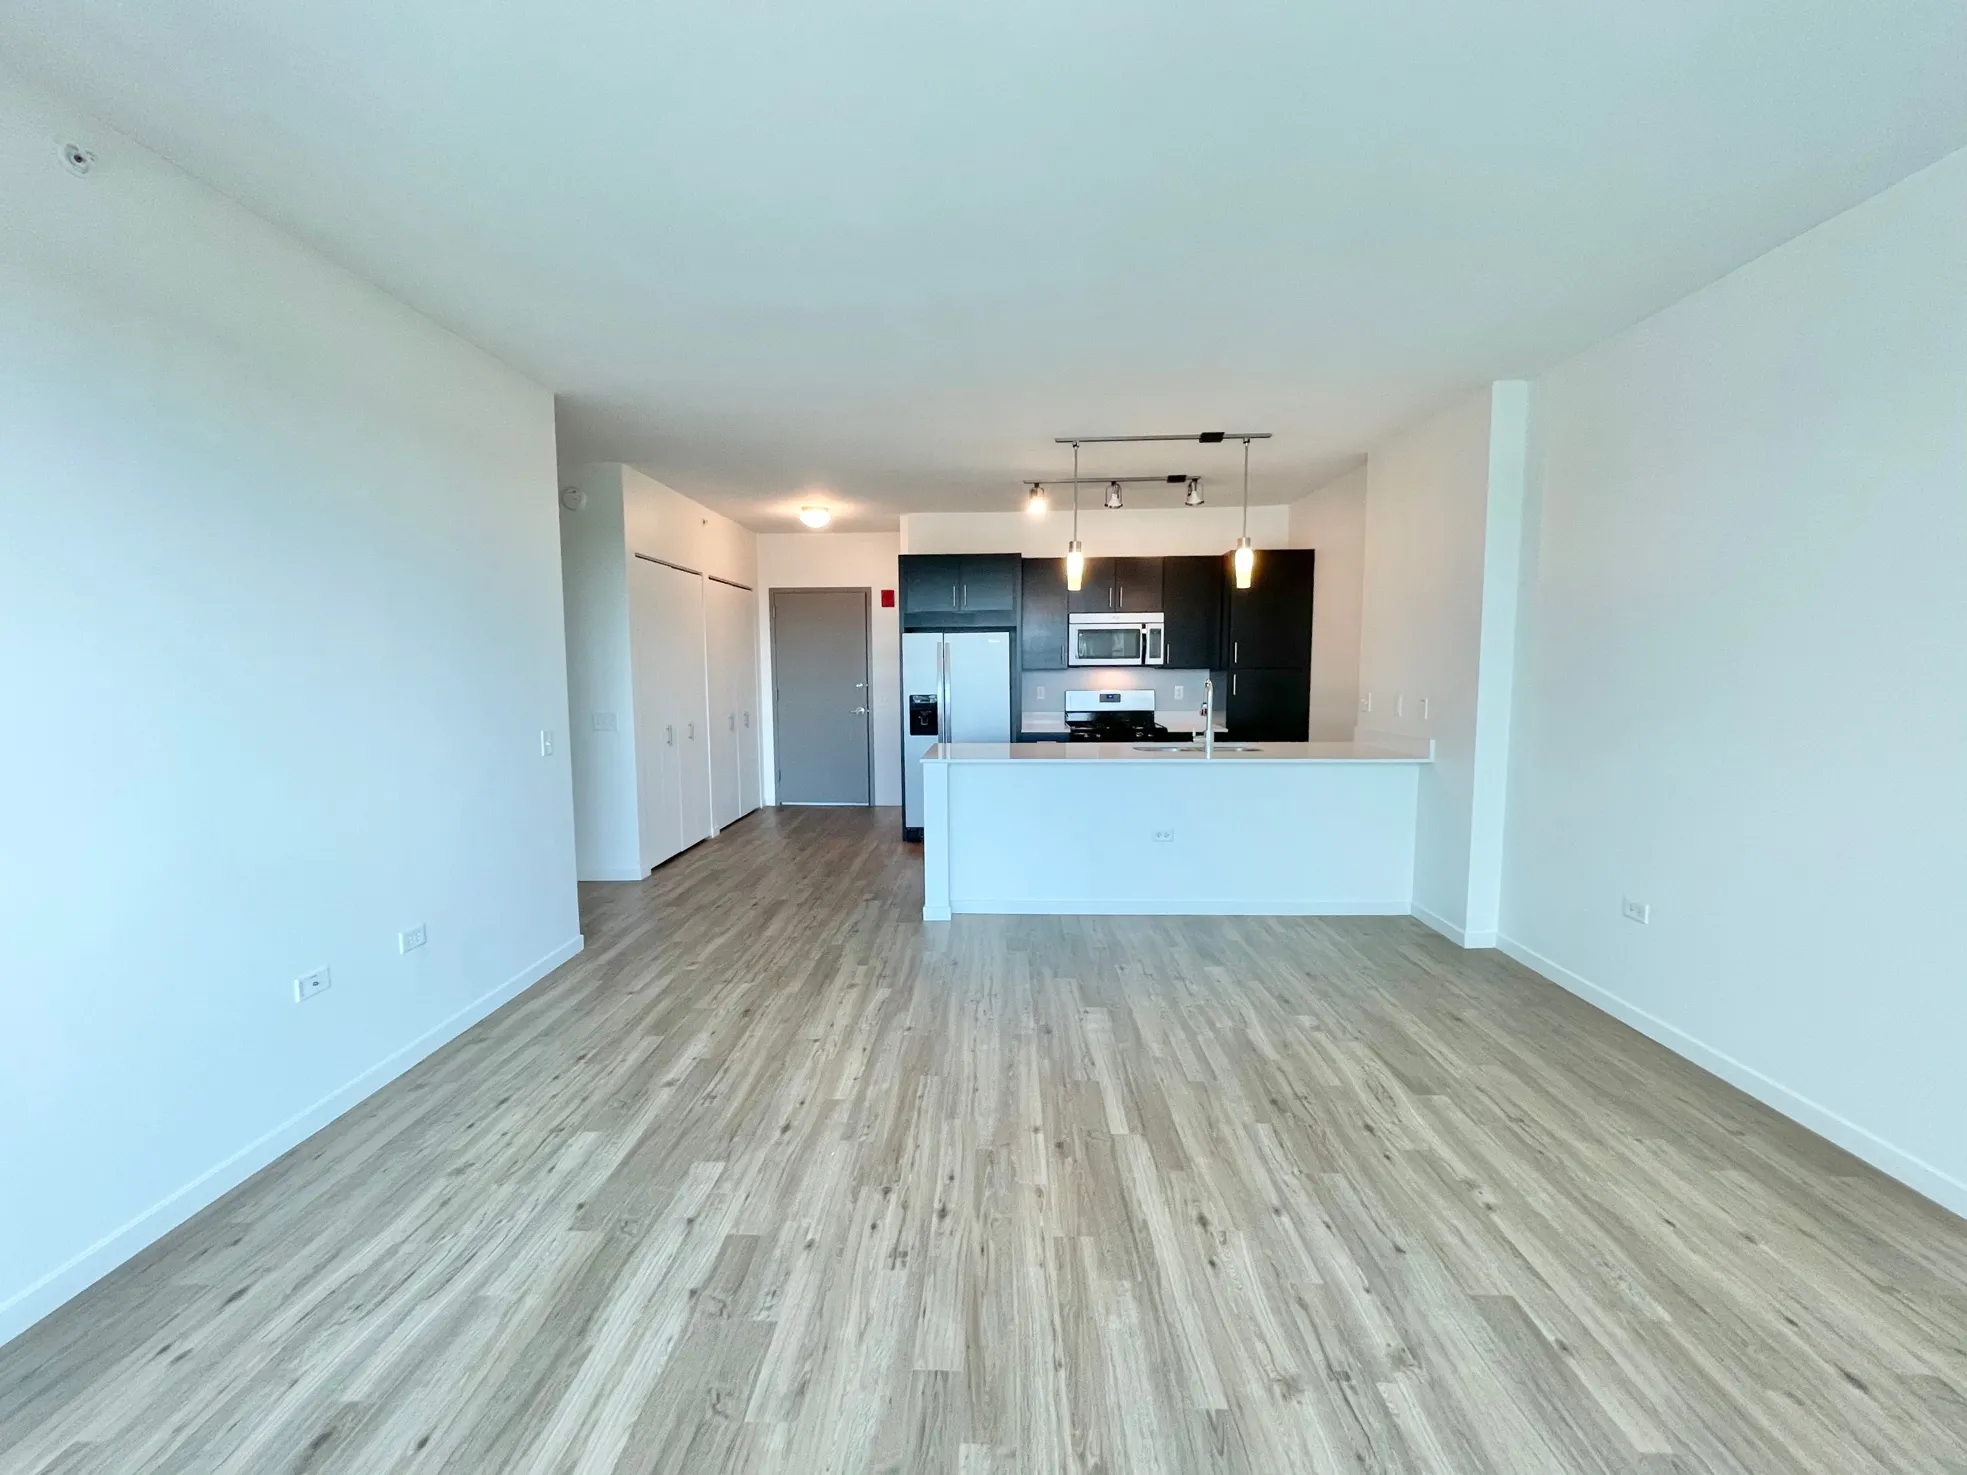 3740 N HALSTED ST 60613-Halsted North Apts-unit#00621-Chicago-IL